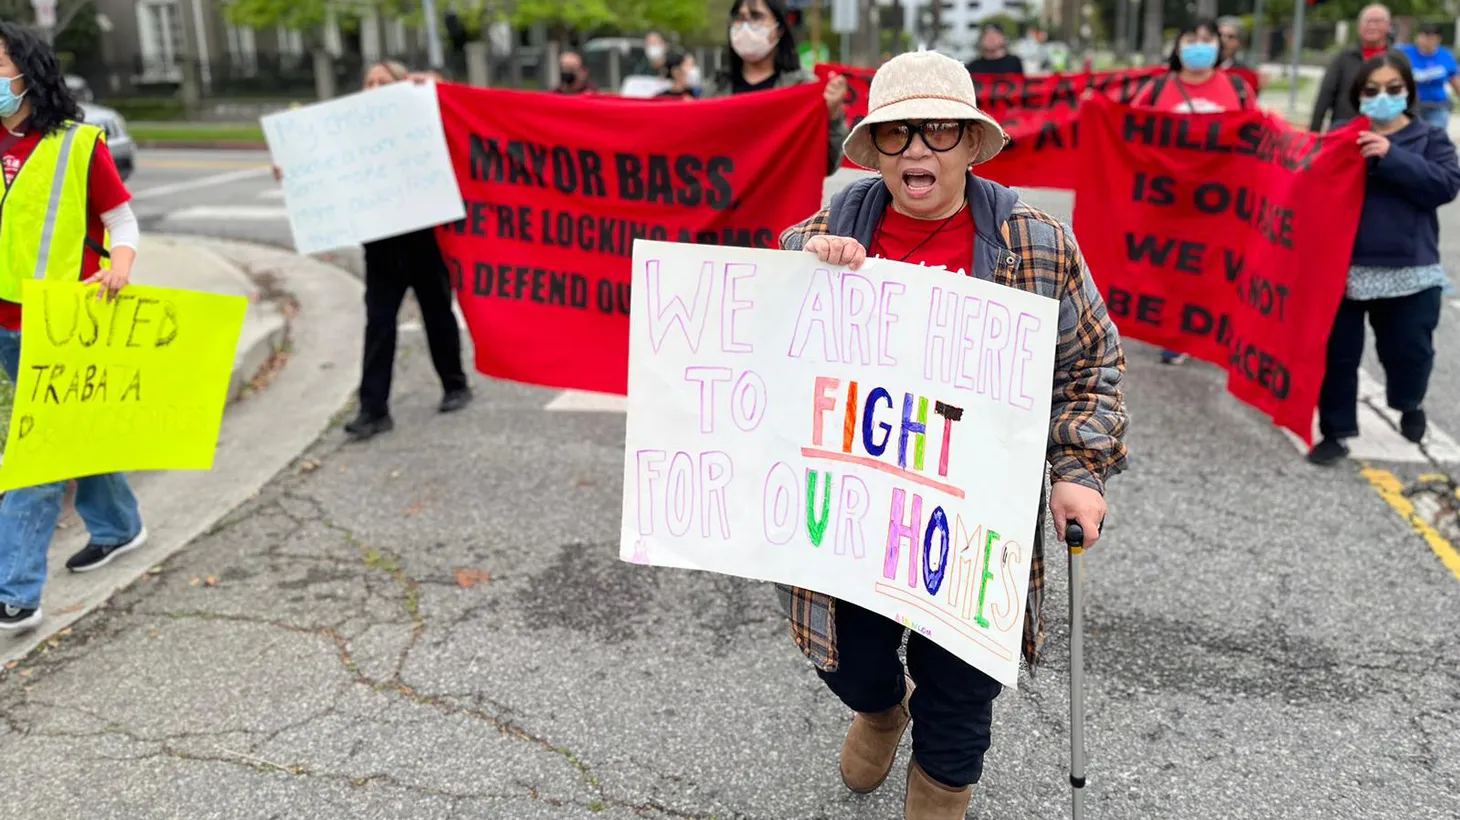 Longtime residents of the Hillside Villa apartments took to the streets outside Mayor Karren Bass’ house to protest the lack of movement towards an affordable housing solution with their building’s owner.